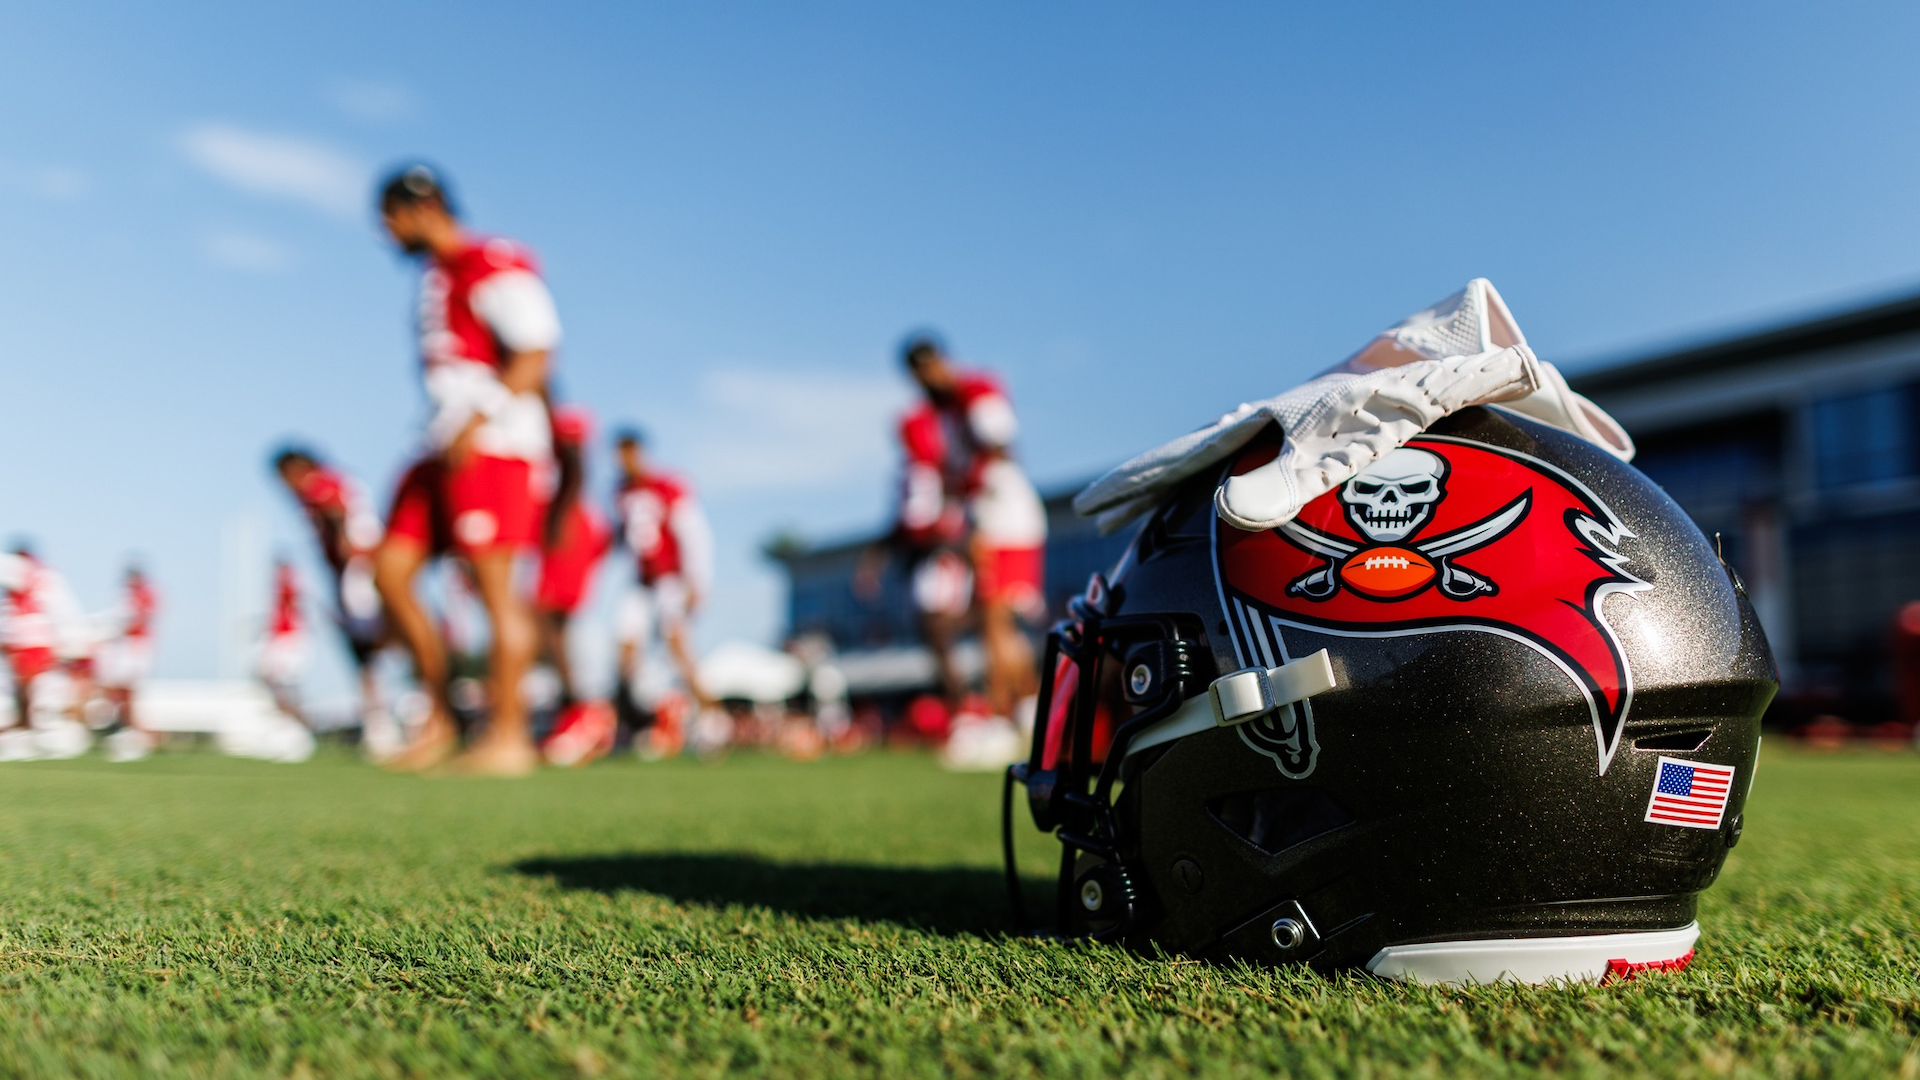 A buccaneers helmet placed on the field with a white glove over it. Football players are practicing in the background.